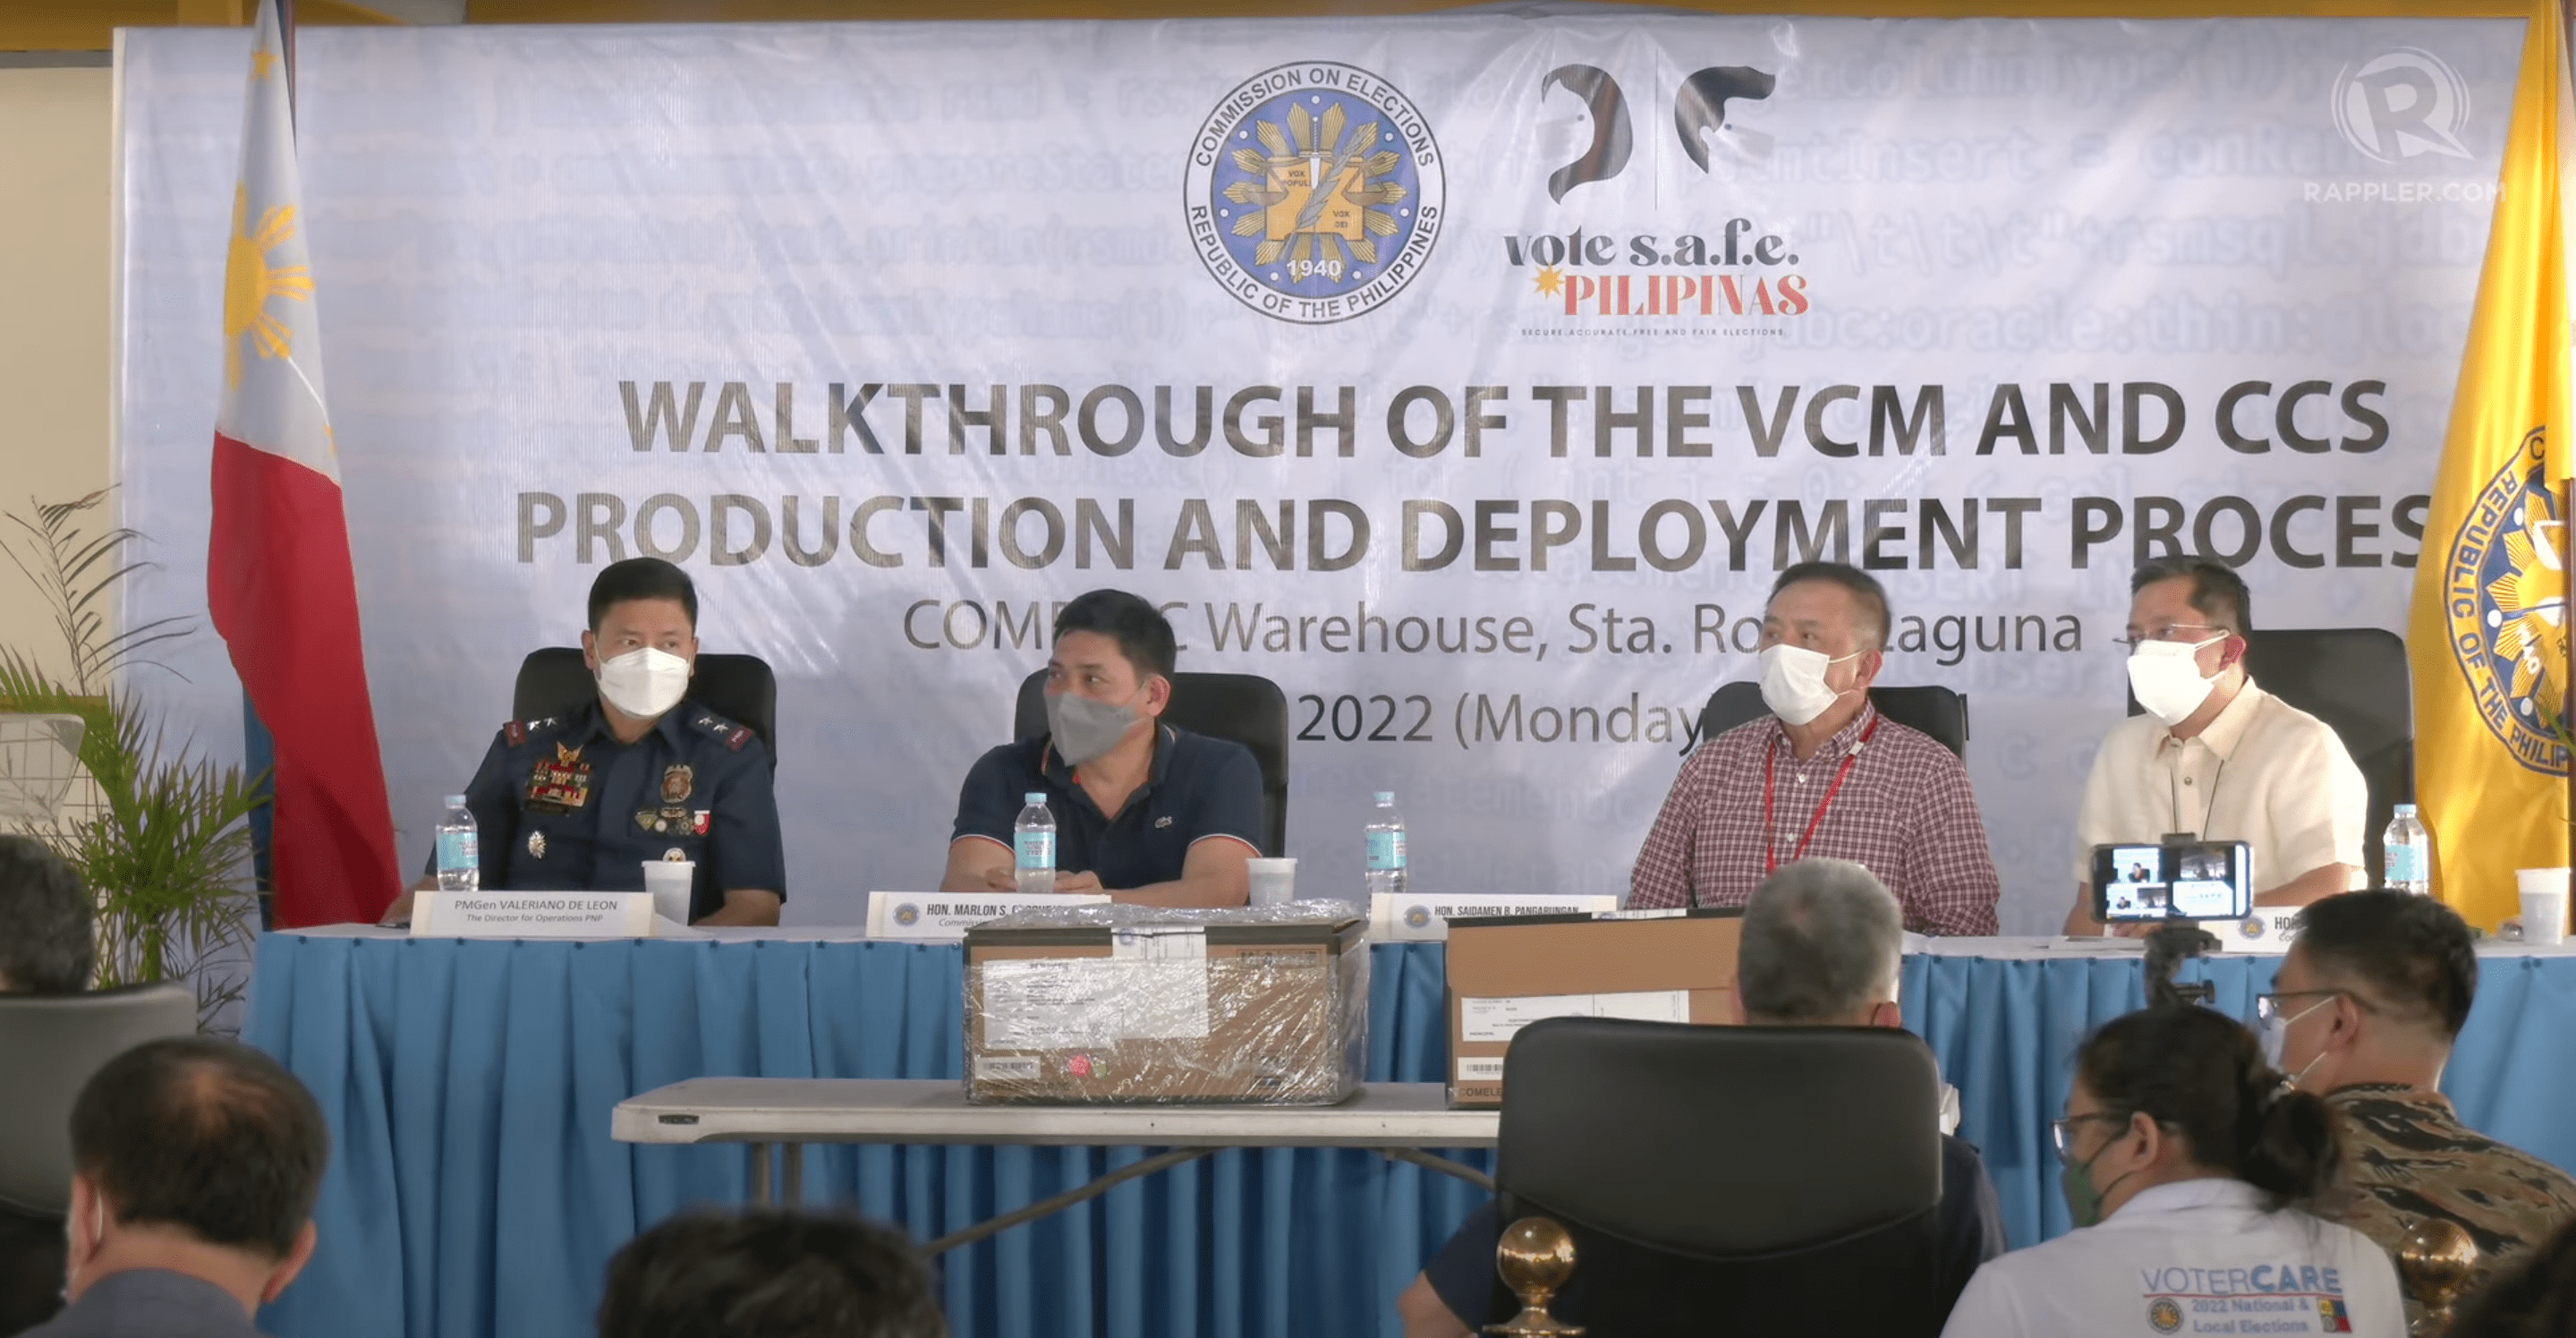 Comelec opens Laguna warehouse to stakeholders as pandemic curbs ease